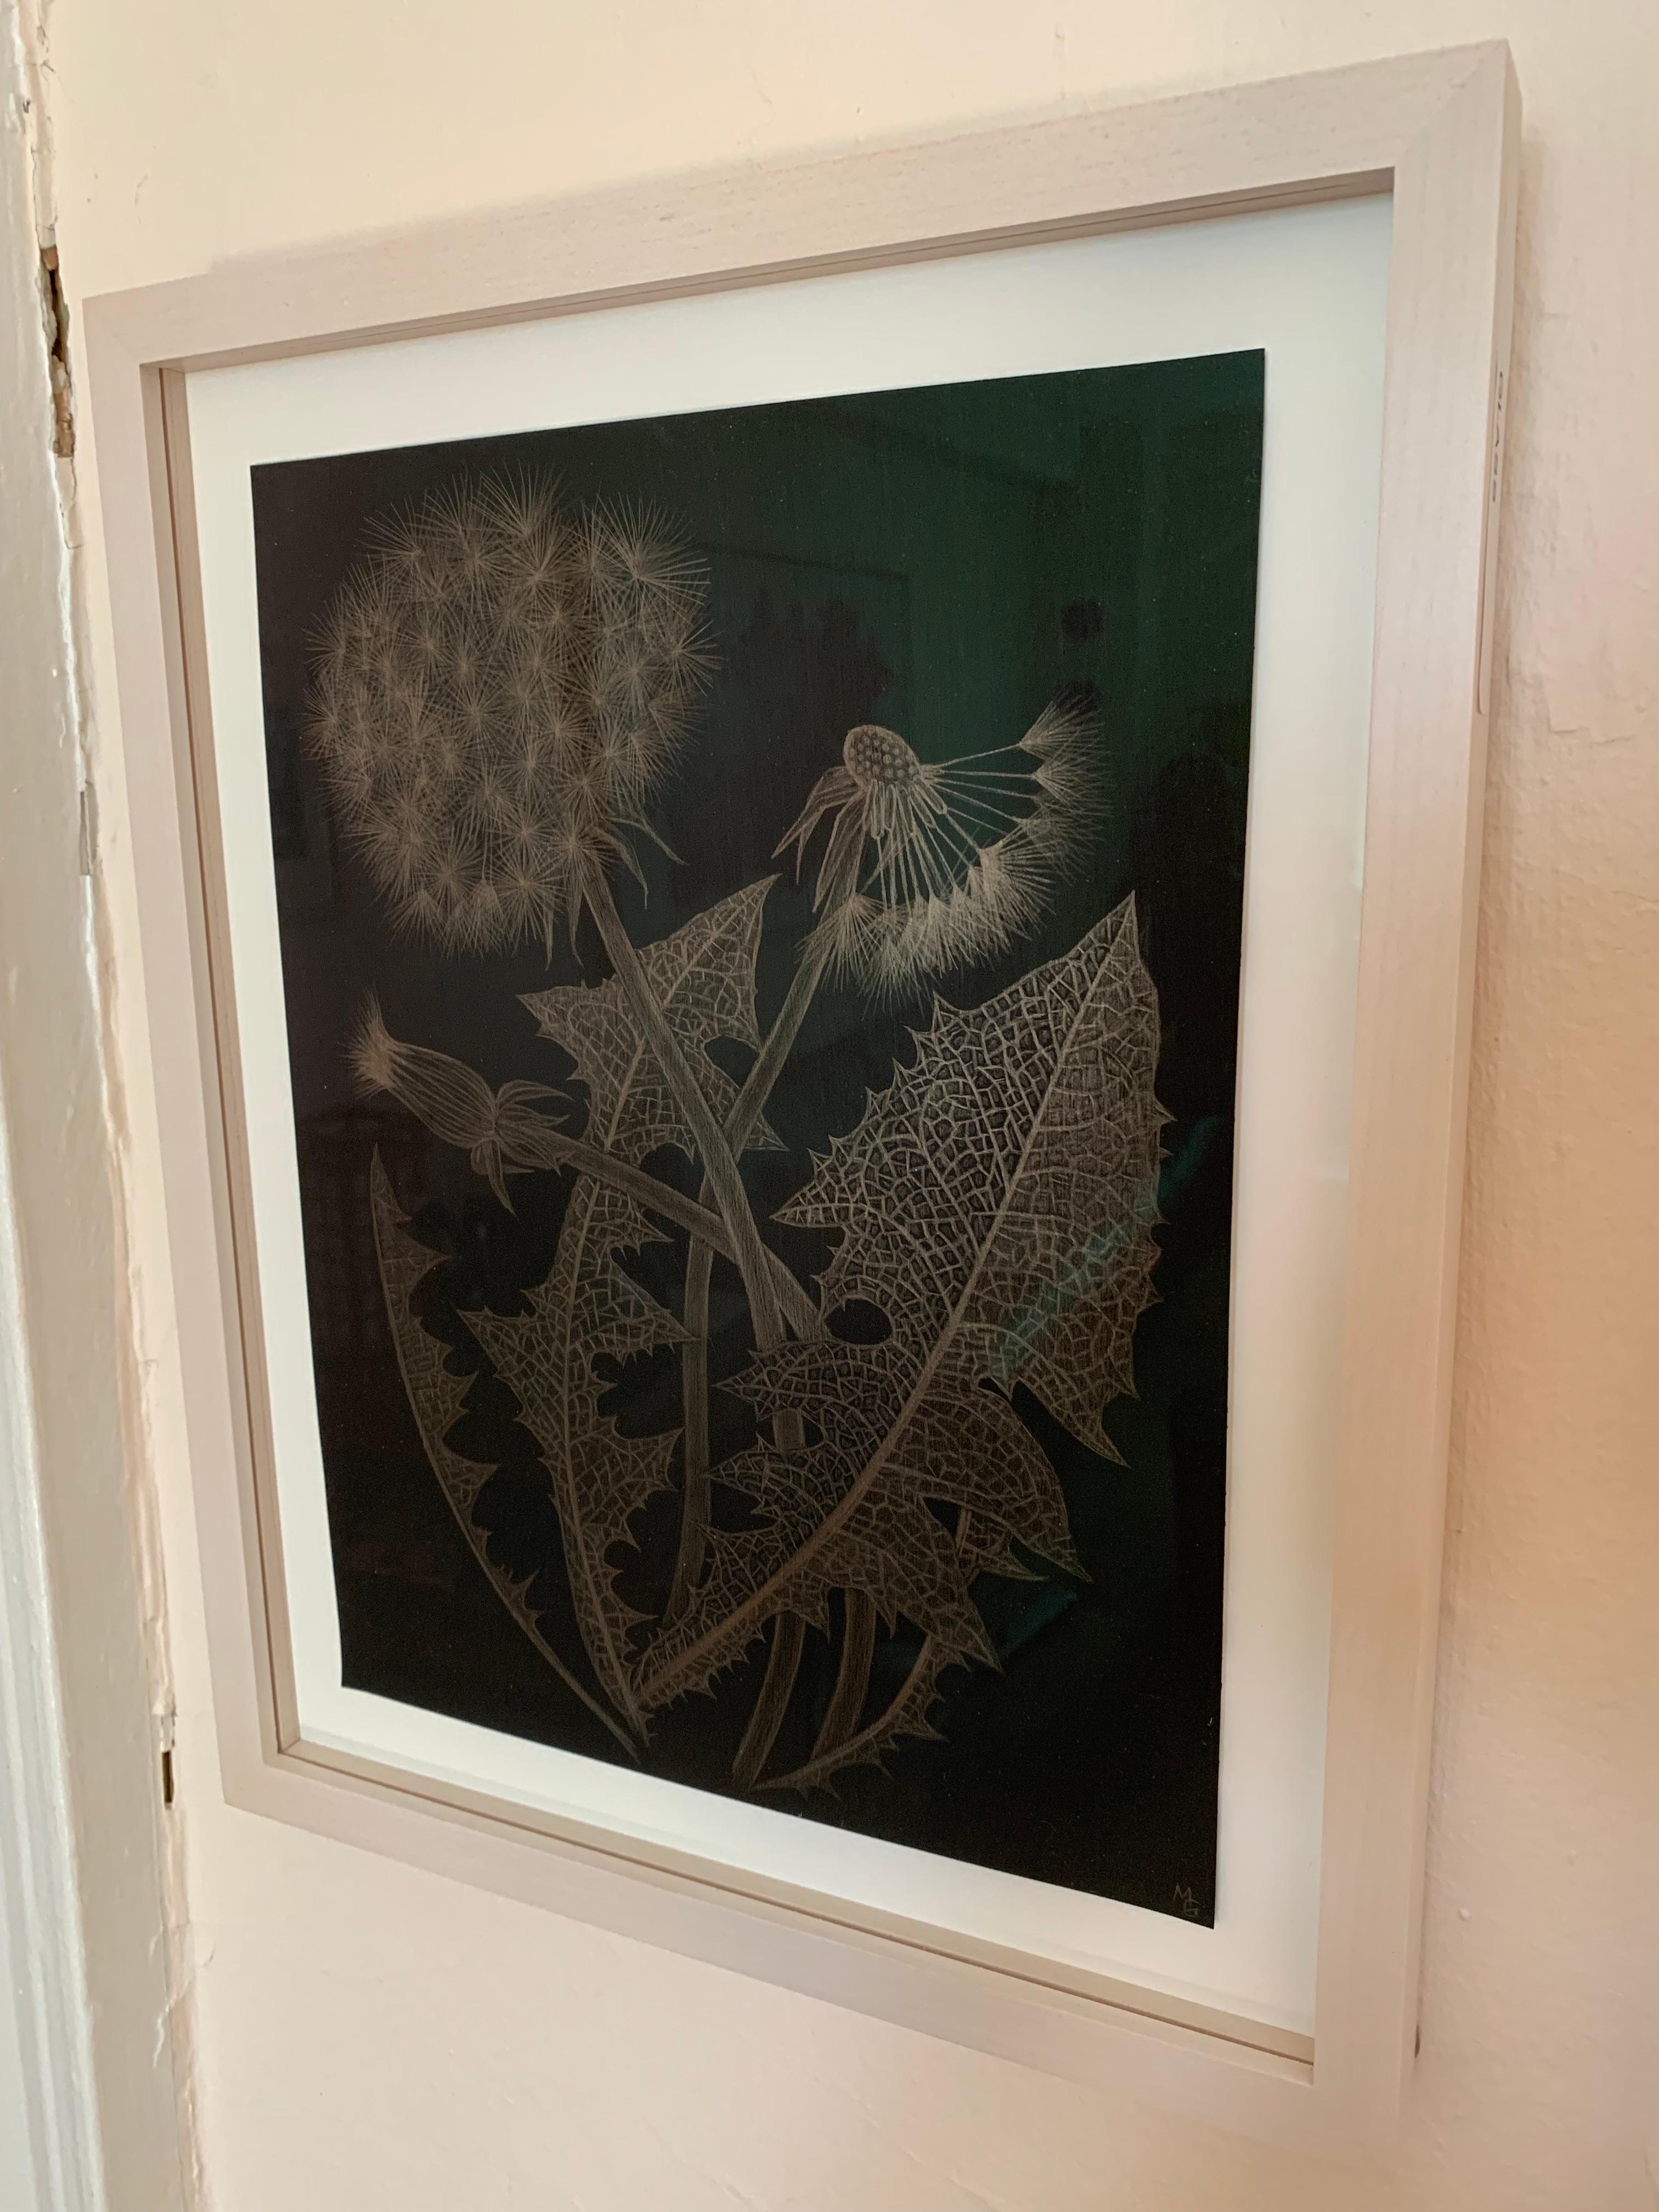 Margot Glass, Two Dandelions with Bud, realist goldpoint still-life, 2019 1